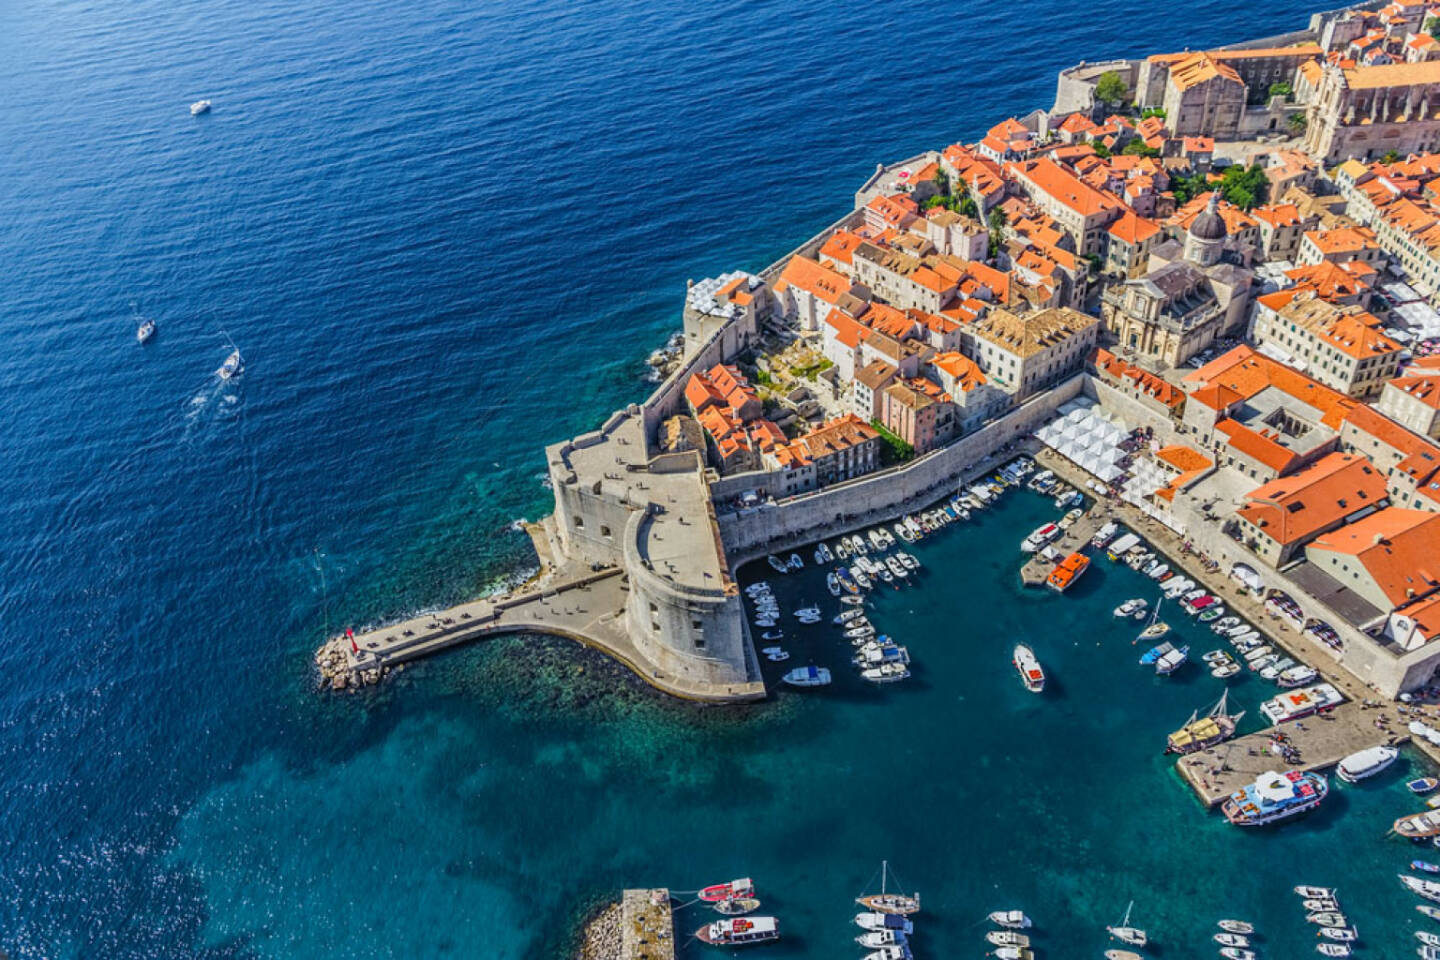 Dubrovnik, Kroatien, http://www.shutterstock.com/de/pic-149631182/stock-photo-aerial-helicopter-shoot-of-dubrovnik-old-town-harbor-and-st-john-fortress.html 